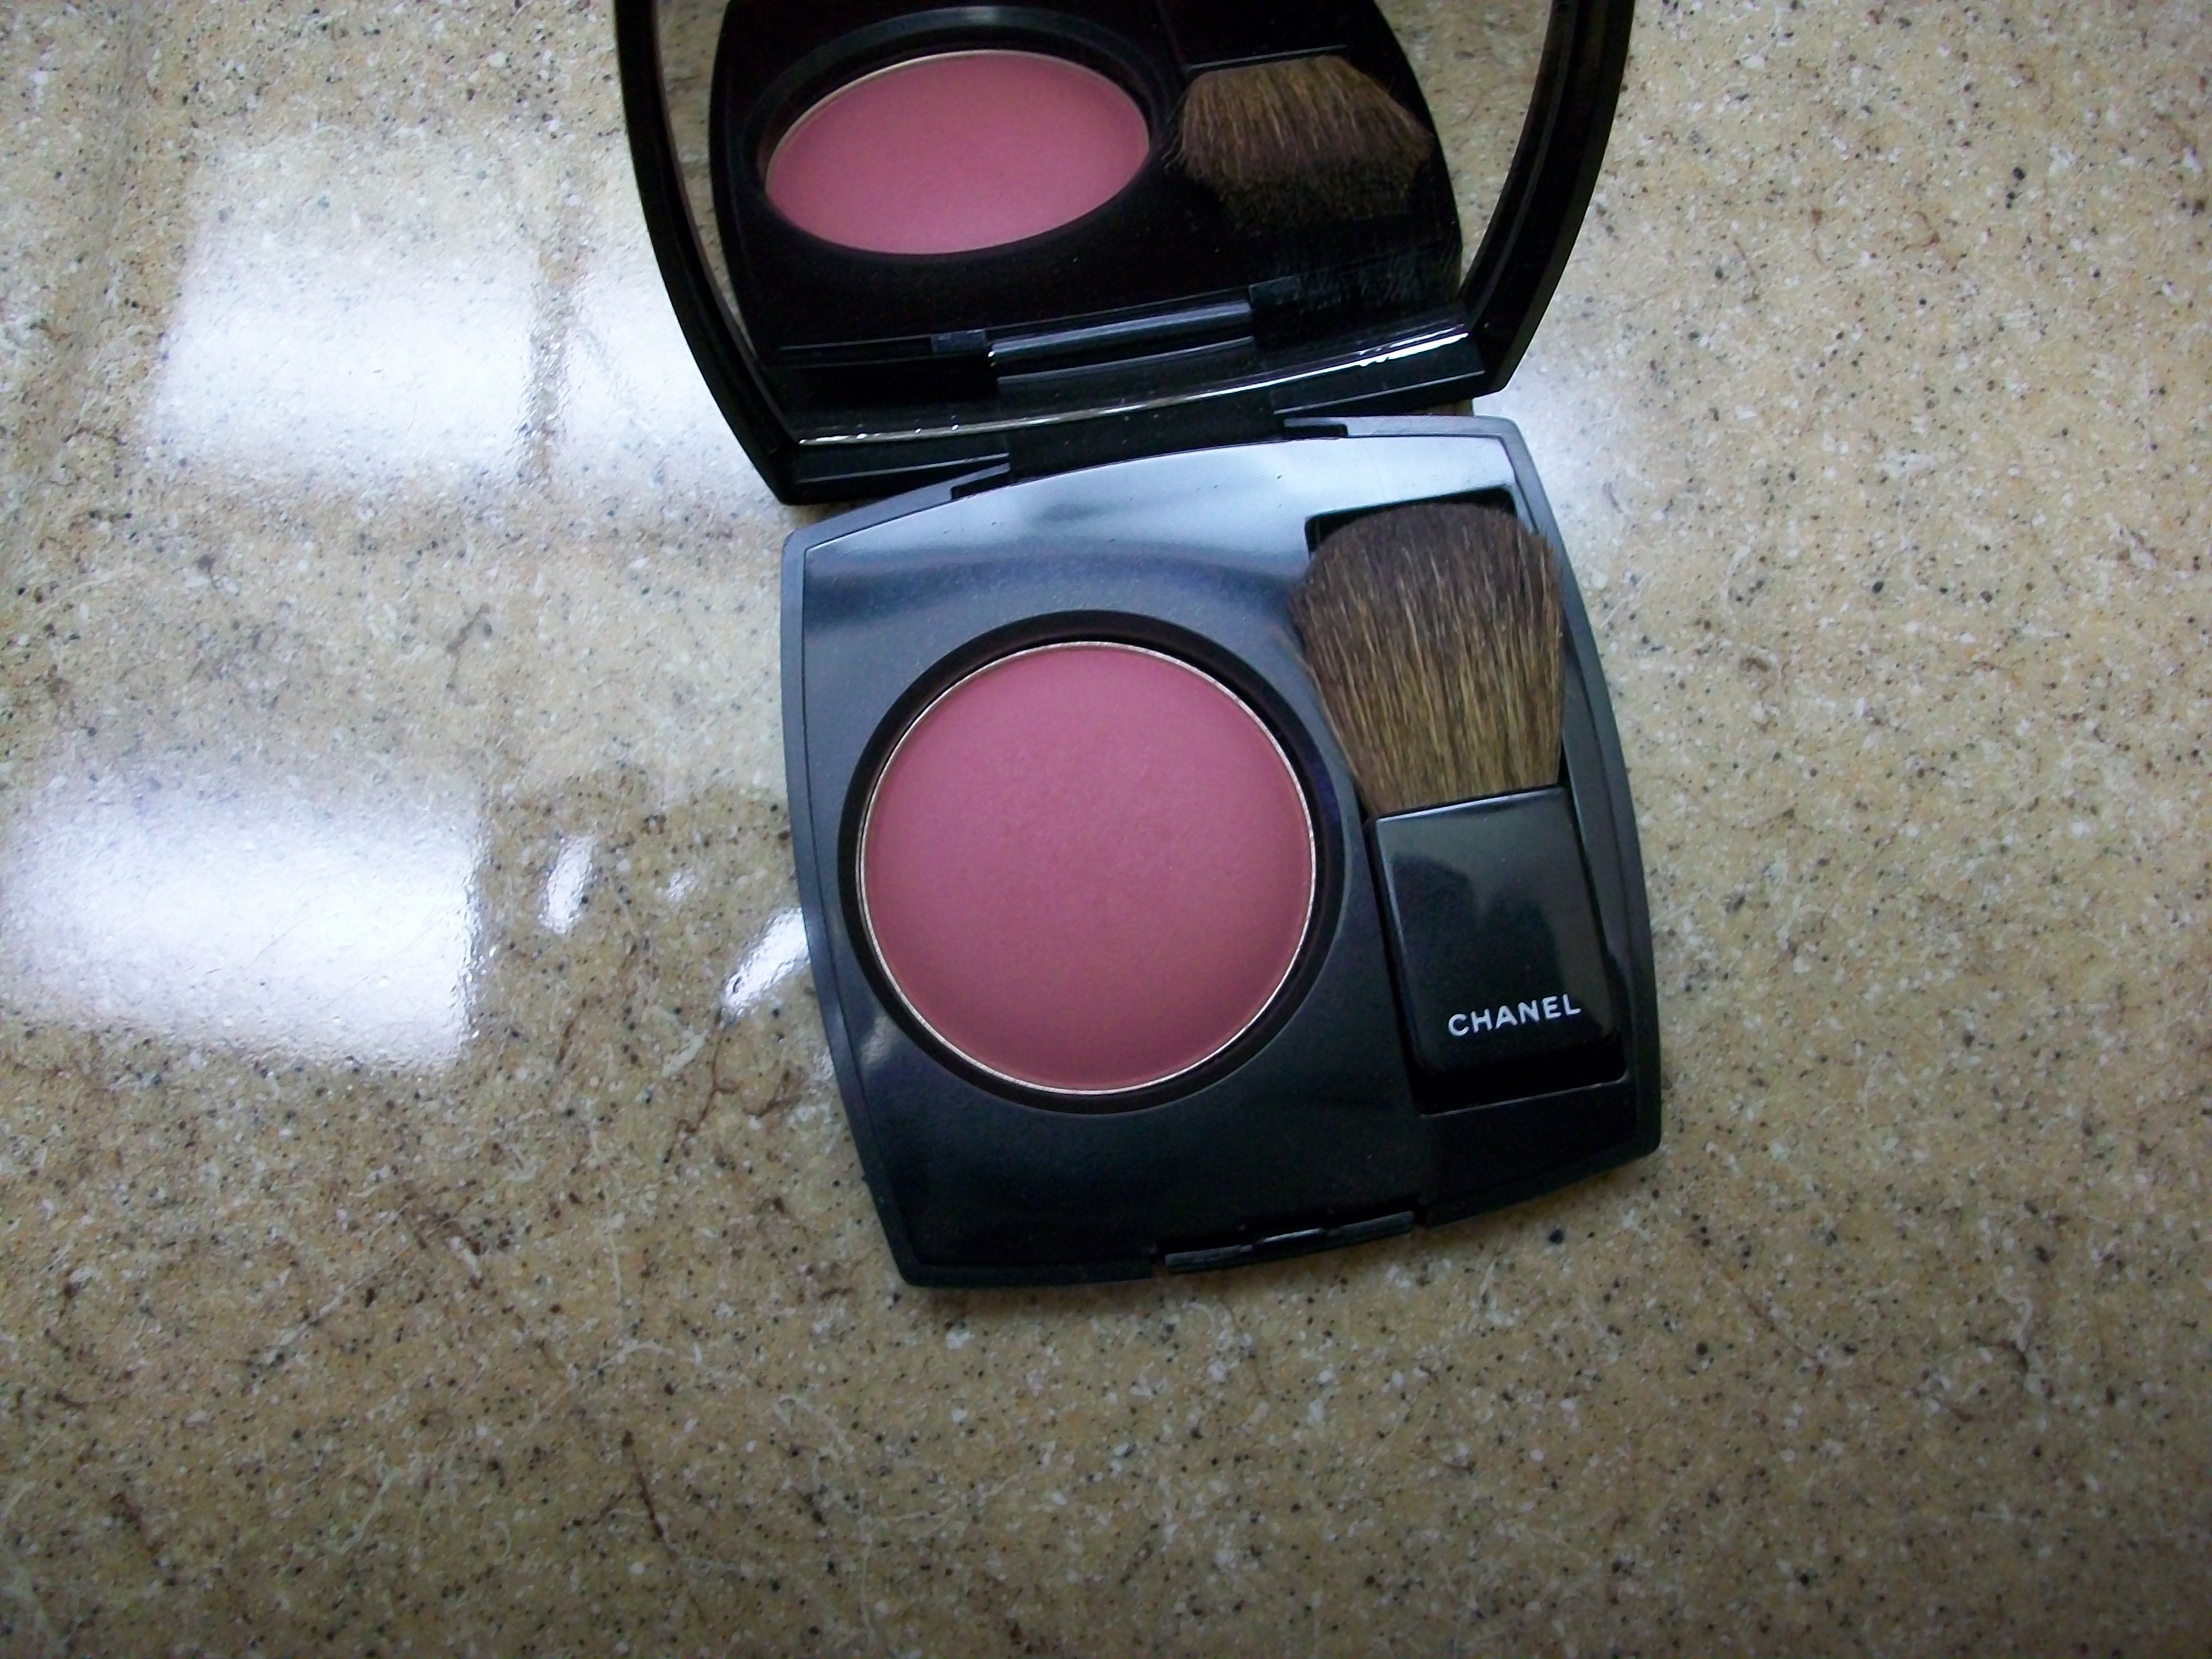 Chanel Les 4 Ombres eyeshadow quads and Joues Contraste blushes